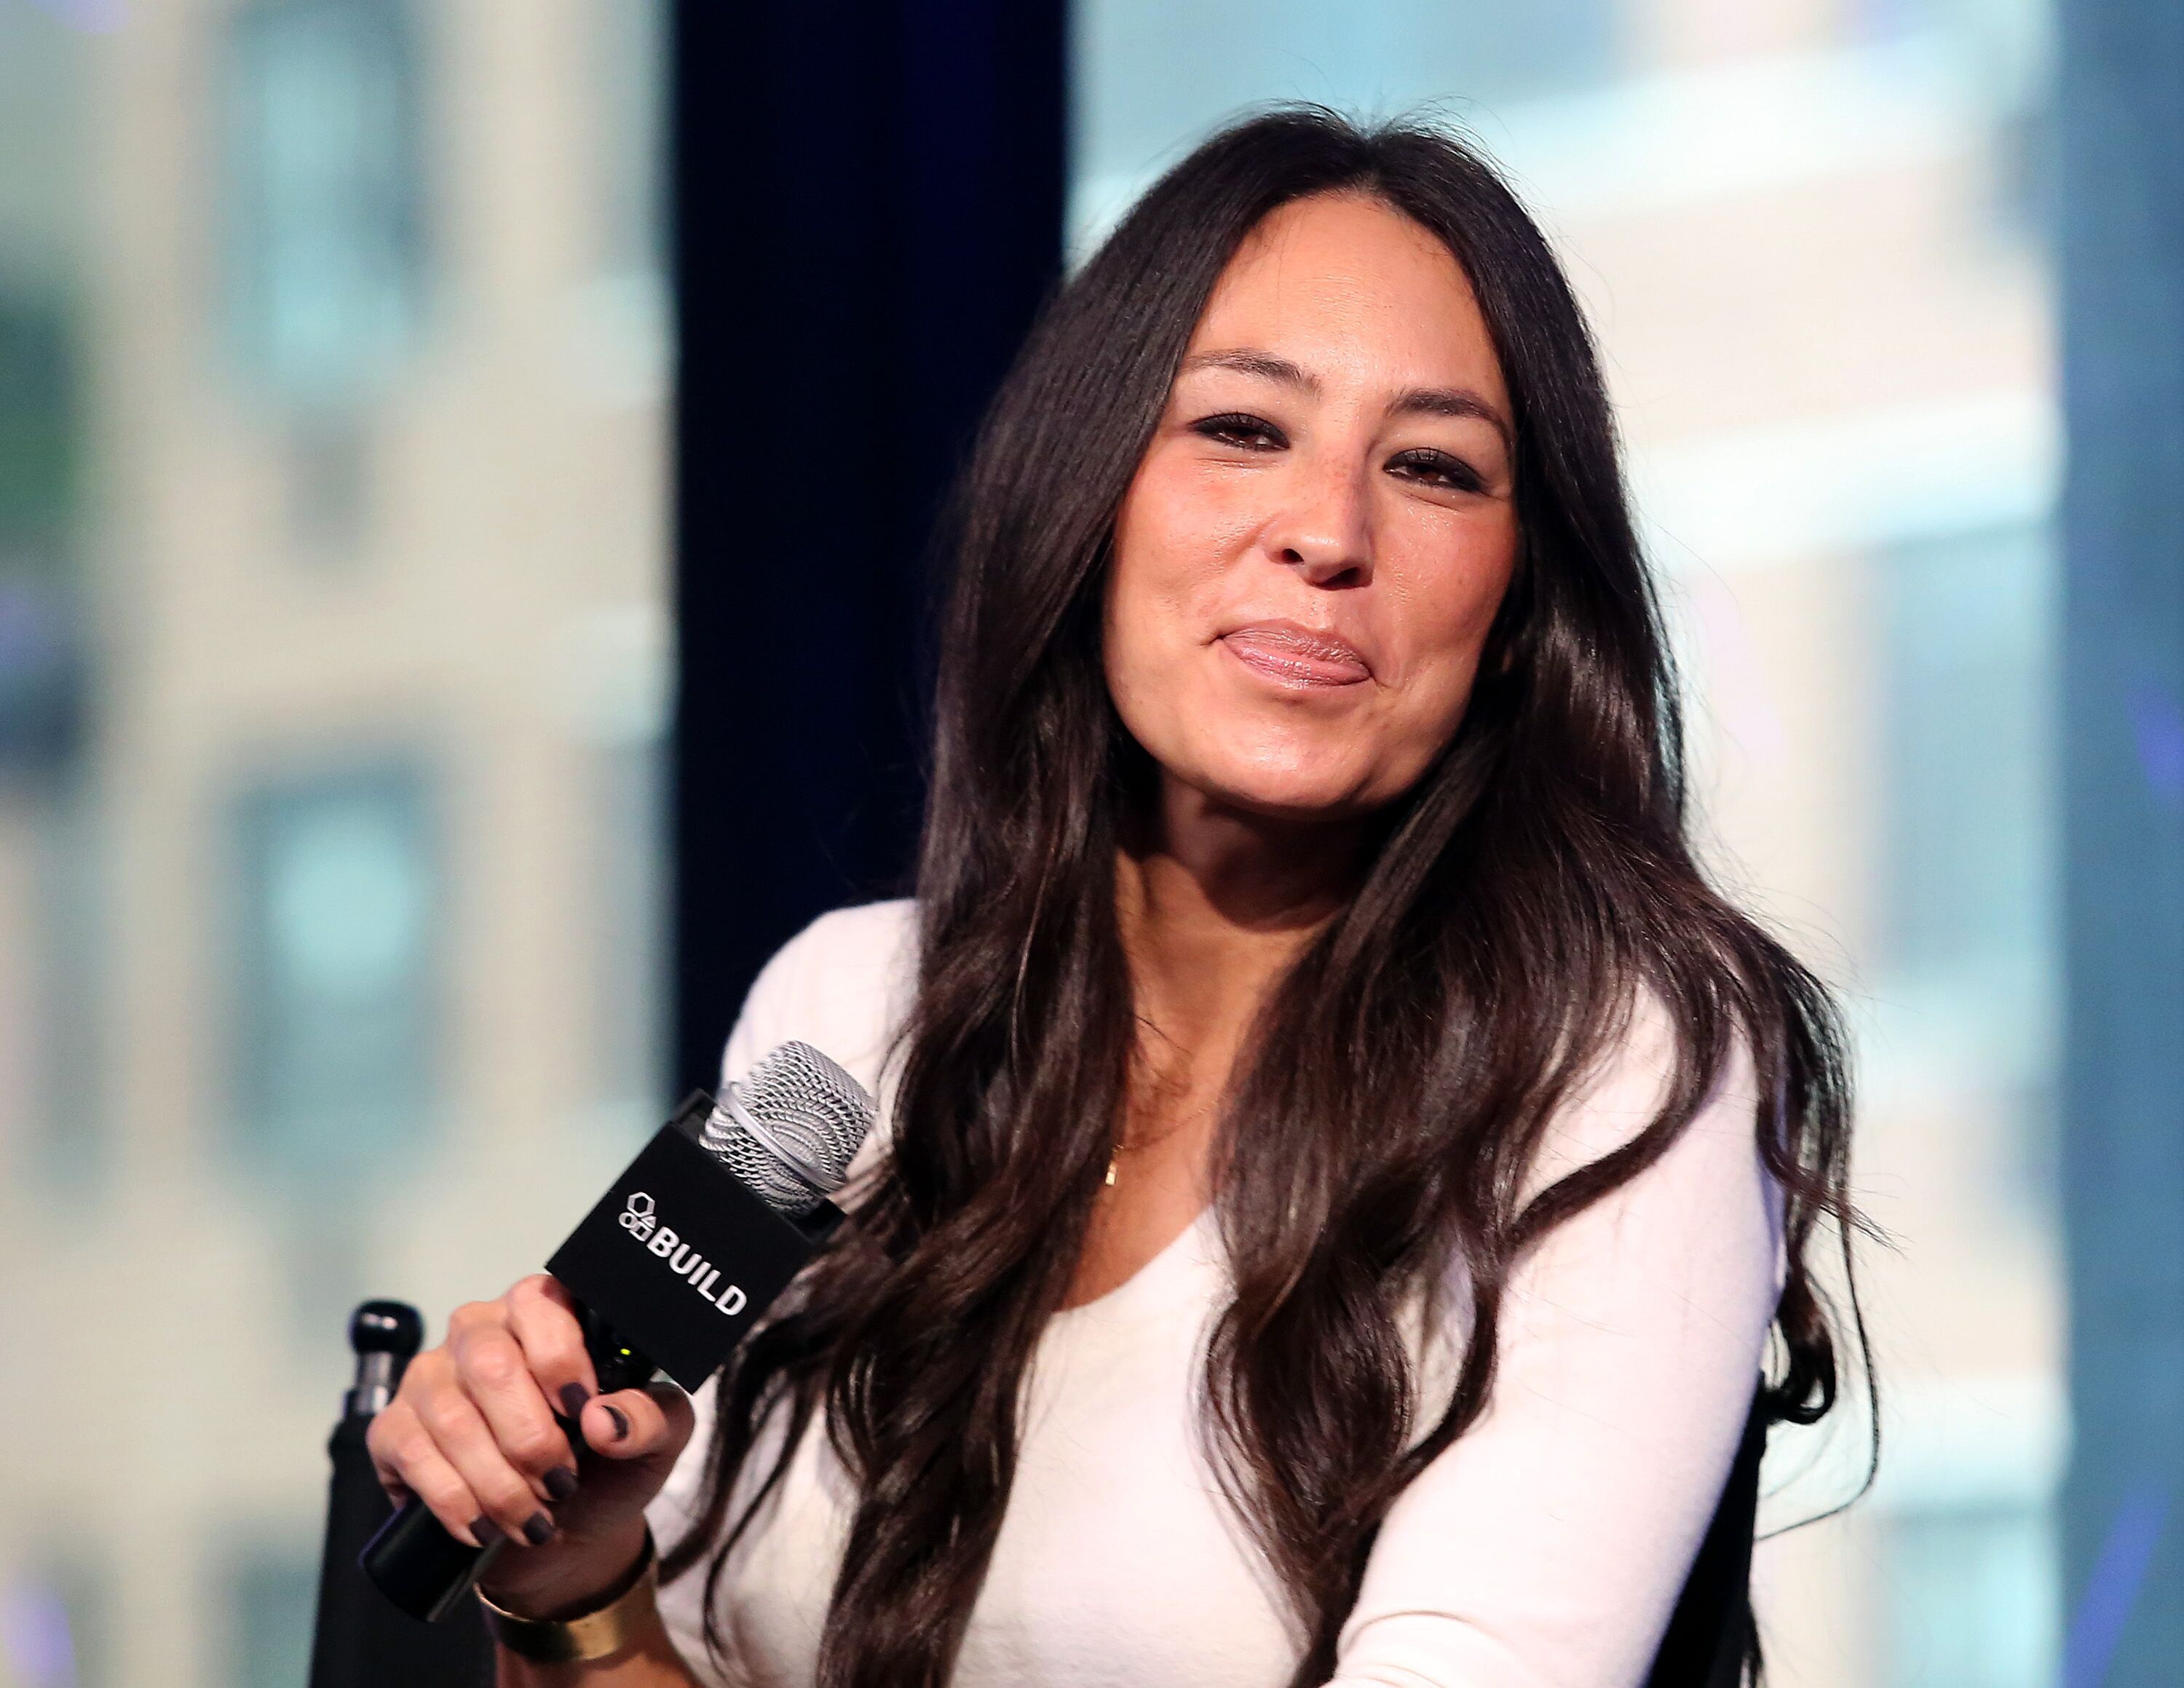 Joanna Gaines appear to promote "The Magnolia Story" during the AOL BUILD Series at AOL HQ on October 19, 2016 in New York City | Photo: Getty Images 